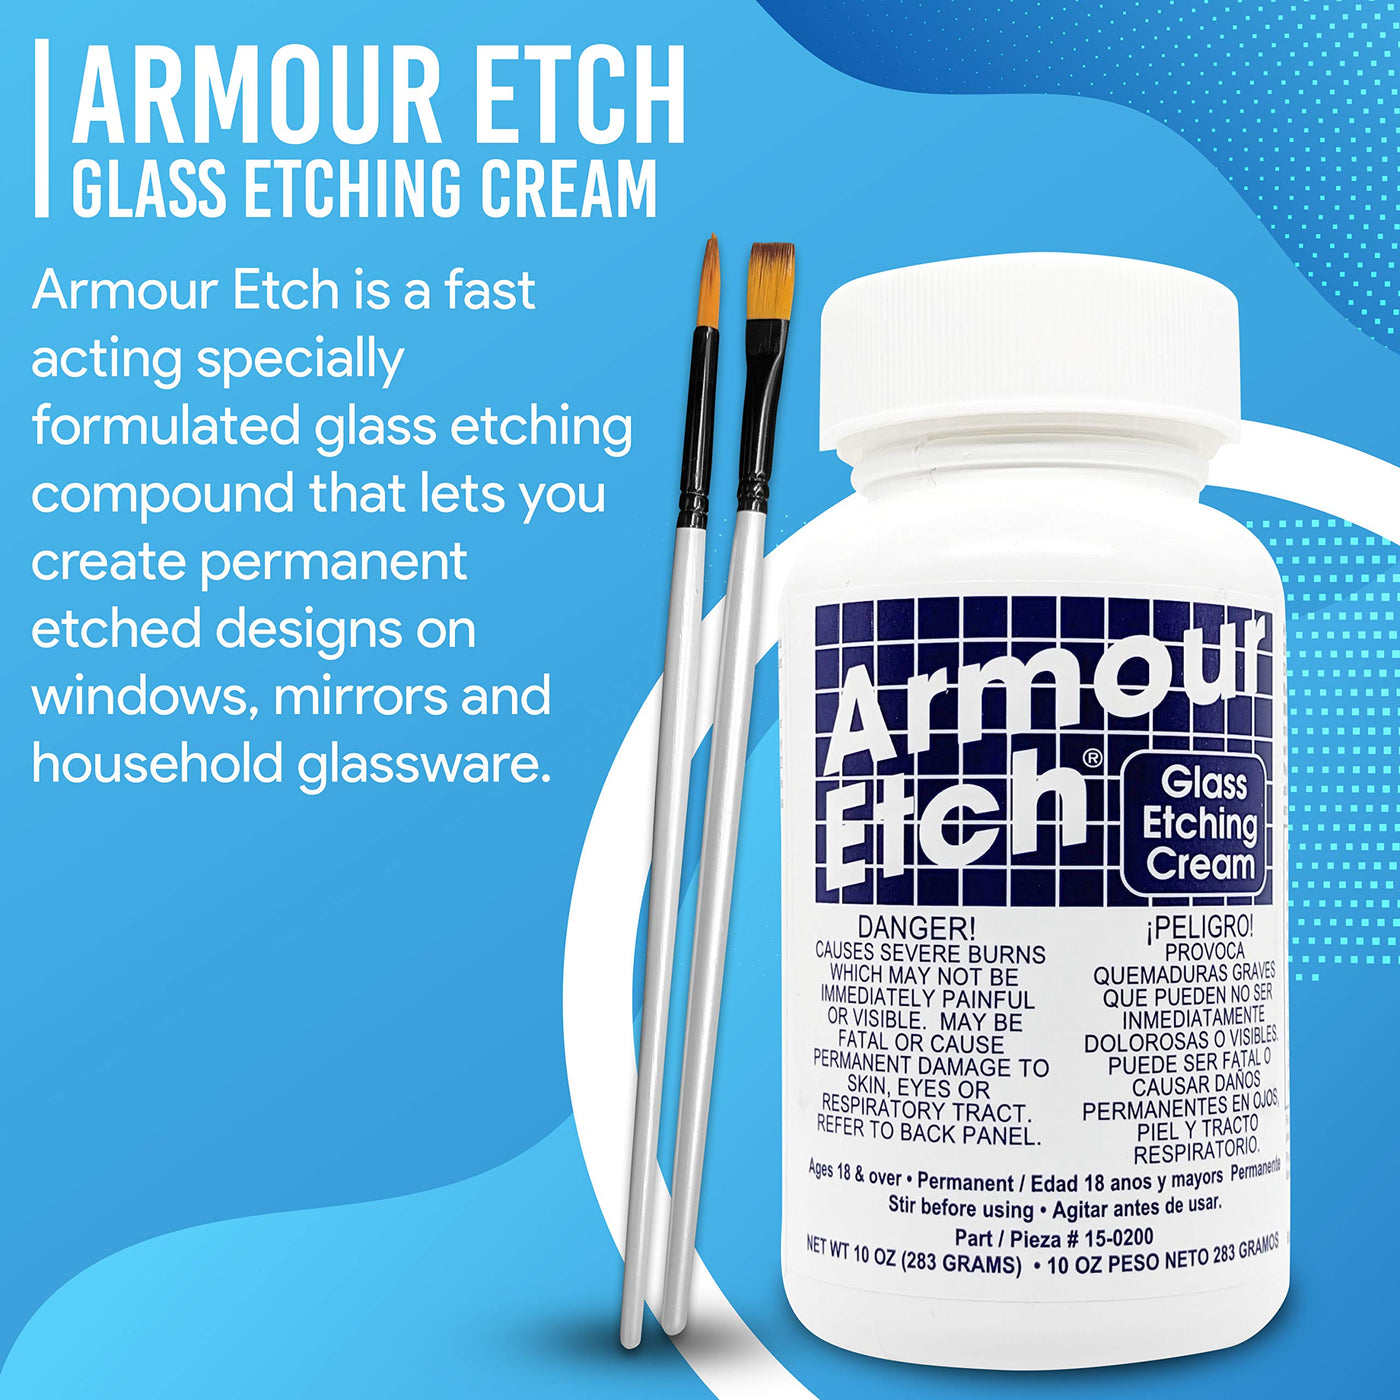 Armour Etch Glass Etching Cream Kit - Create Permanently Etched